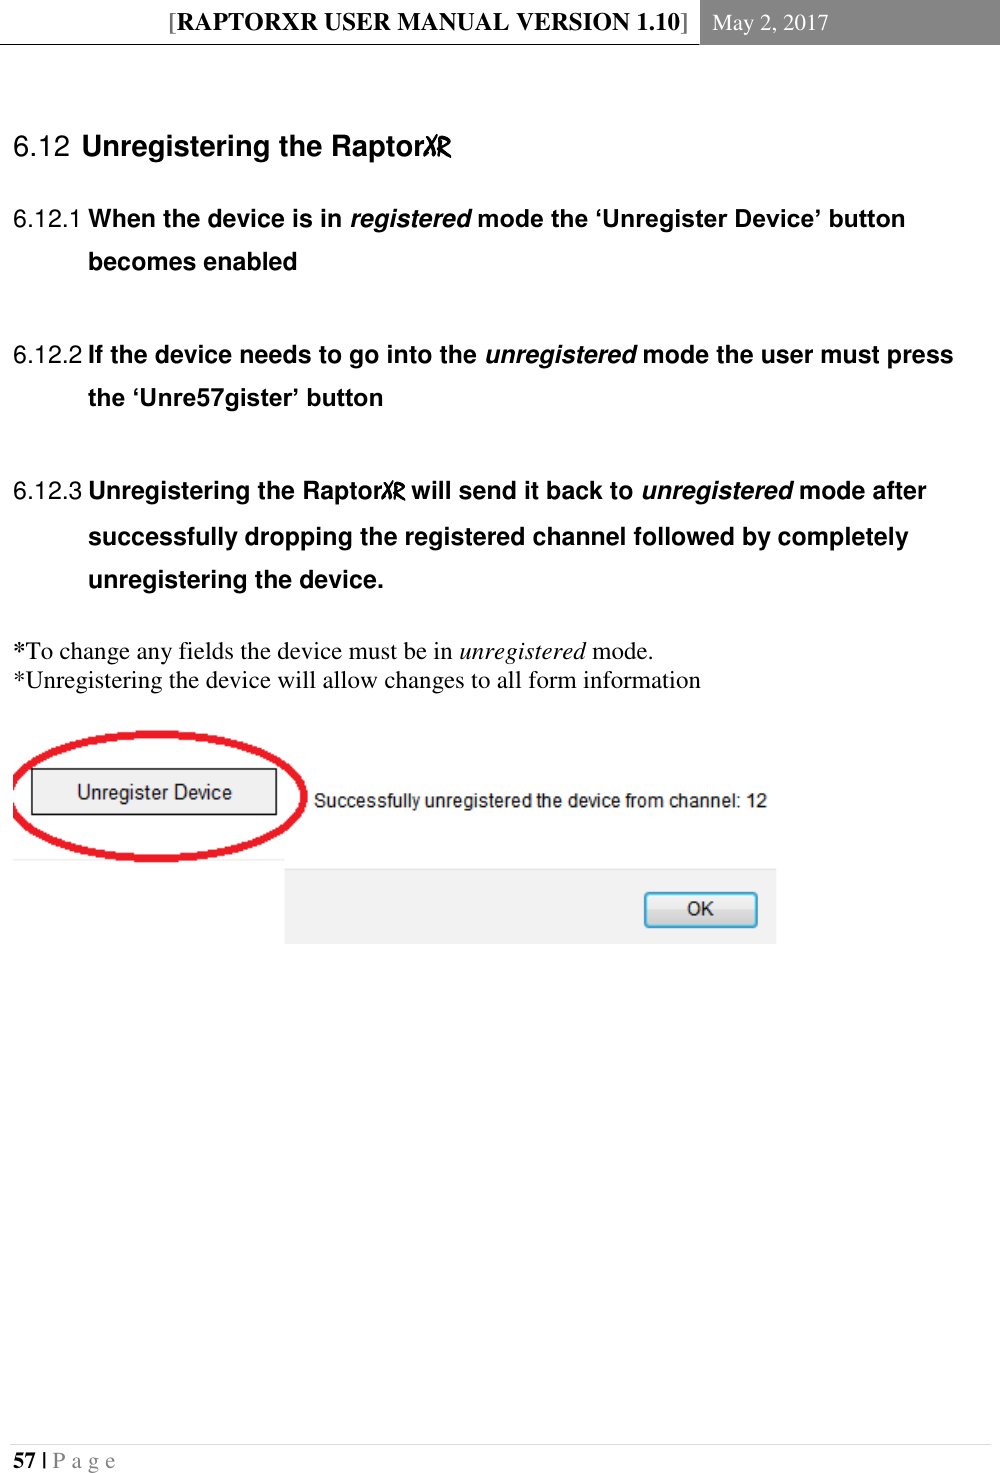 [RAPTORXR USER MANUAL VERSION 1.10] May 2, 2017  57 | P a g e      Unregistering the RaptorXR 6.12 When the device is in registered mode the ‘Unregister Device’ button 6.12.1becomes enabled   If the device needs to go into the unregistered mode the user must press 6.12.2the ‘Unre57gister’ button   Unregistering the RaptorXR will send it back to unregistered mode after 6.12.3successfully dropping the registered channel followed by completely unregistering the device.  *To change any fields the device must be in unregistered mode.  *Unregistering the device will allow changes to all form information                  